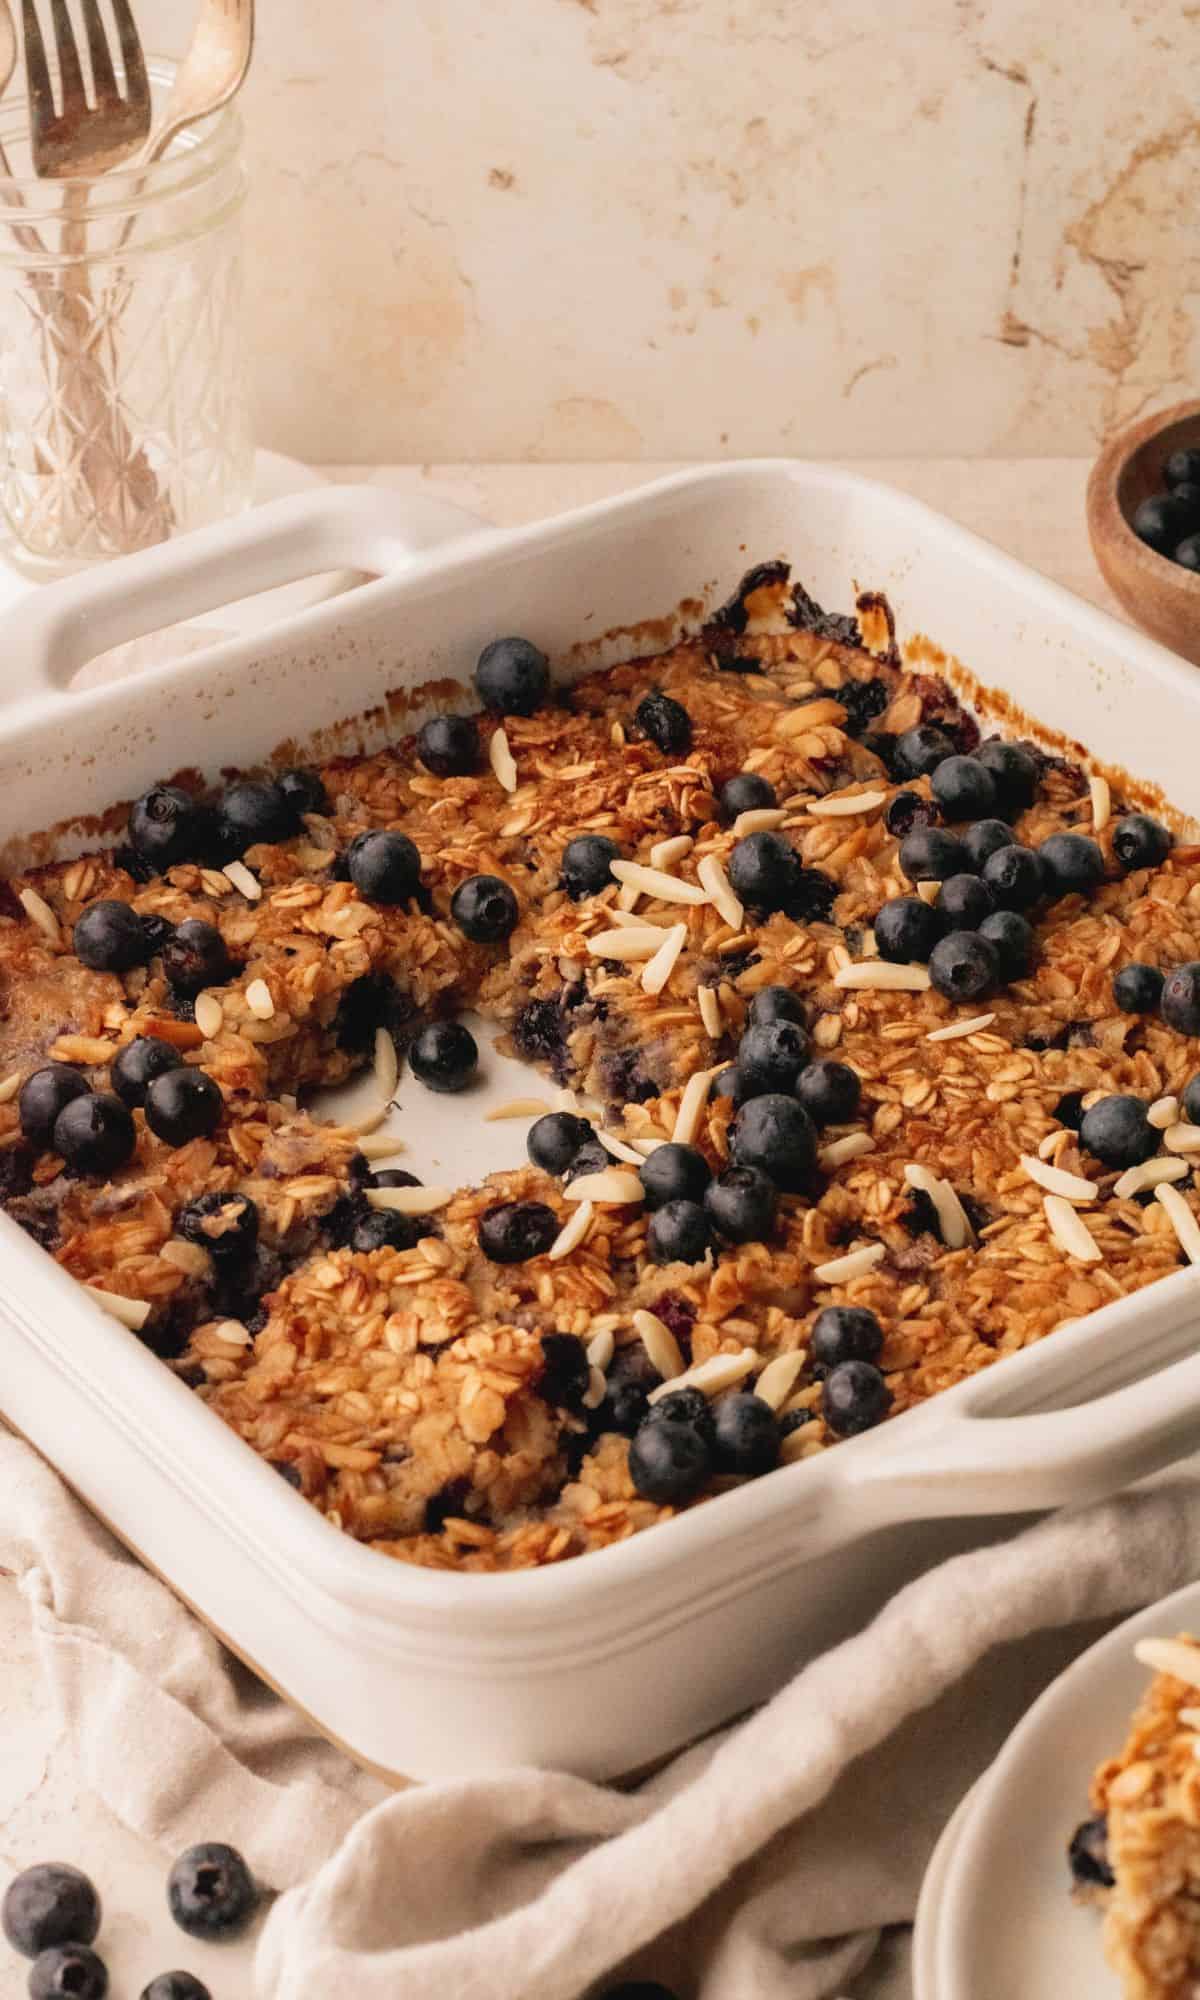 Banana blueberry baked oats in white baking dish with a slice removed.